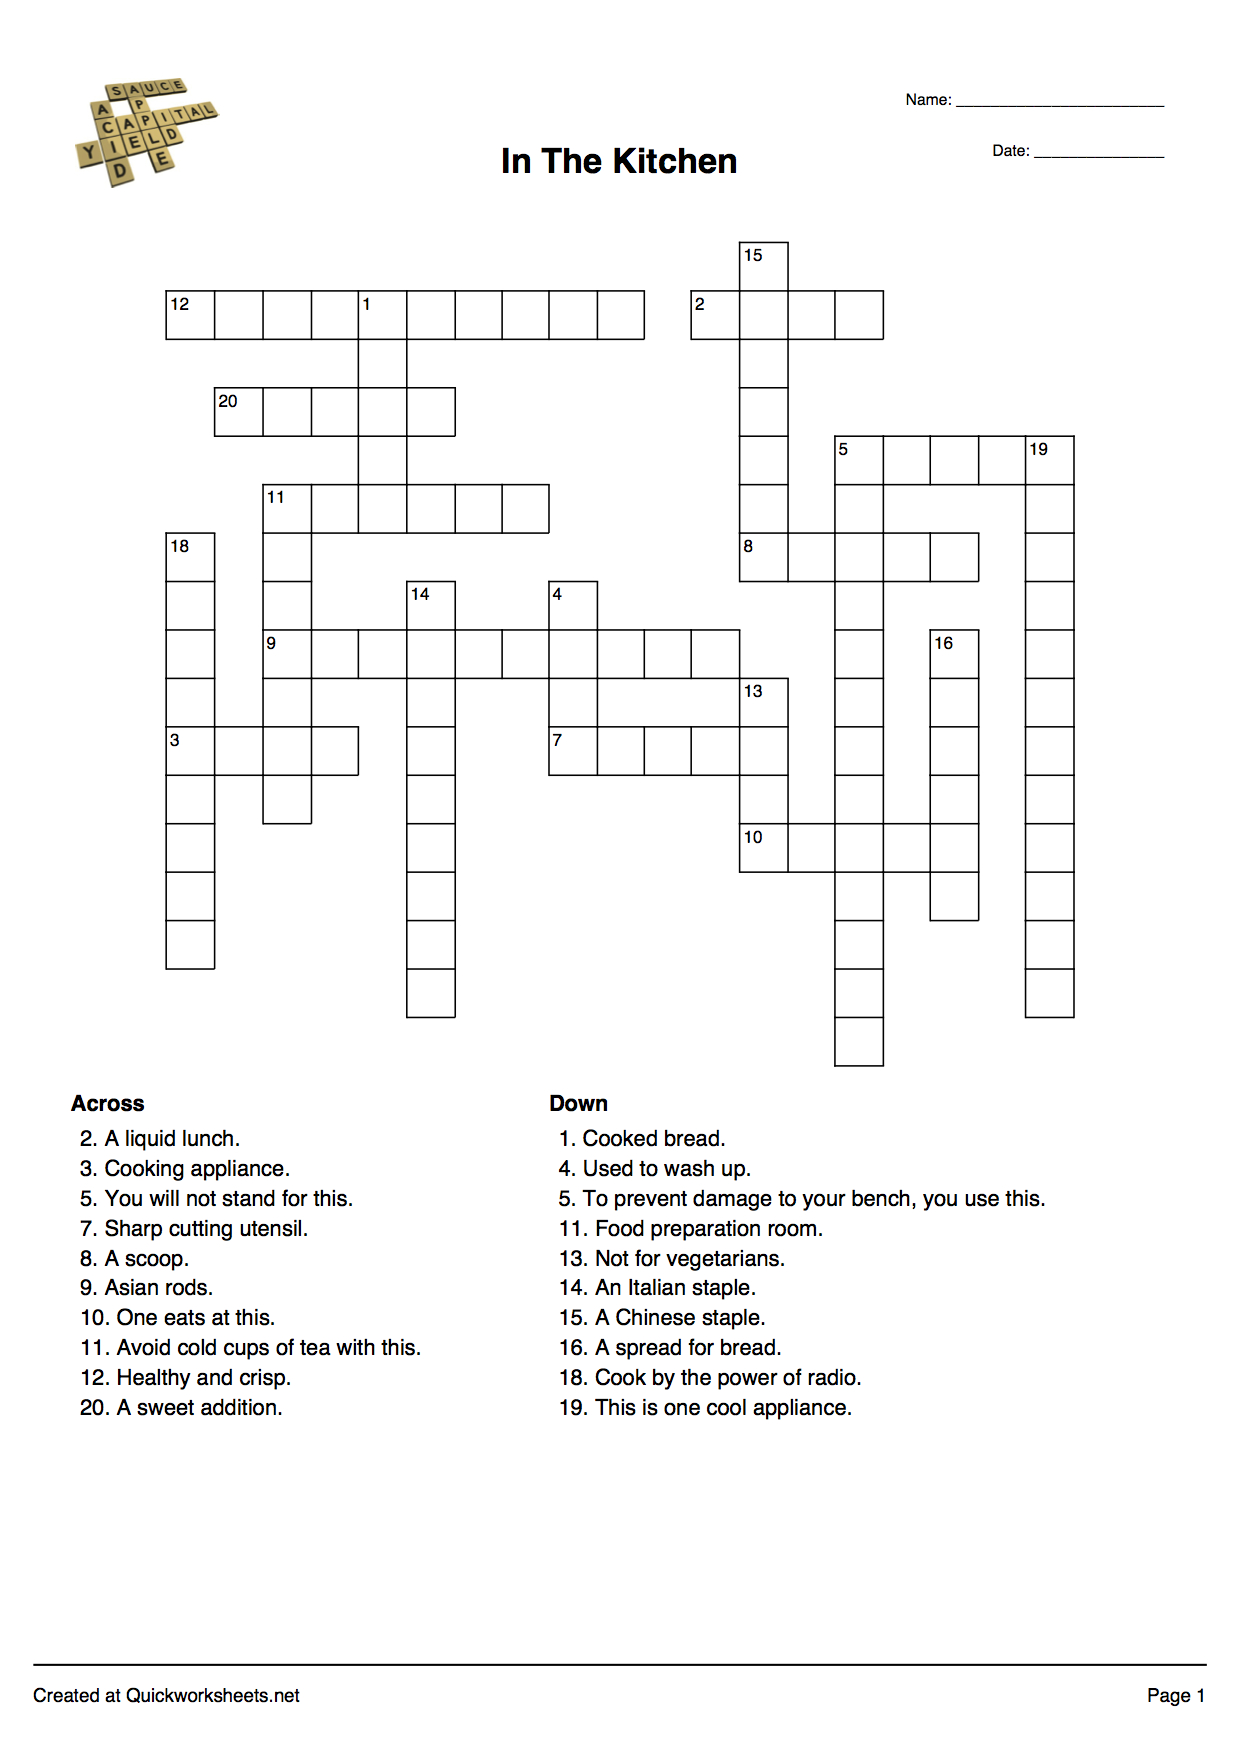 Word Scramble, Wordsearch, Crossword, Matching Pairs And Other - Printable Vocabulary Quiz Crossword Puzzle